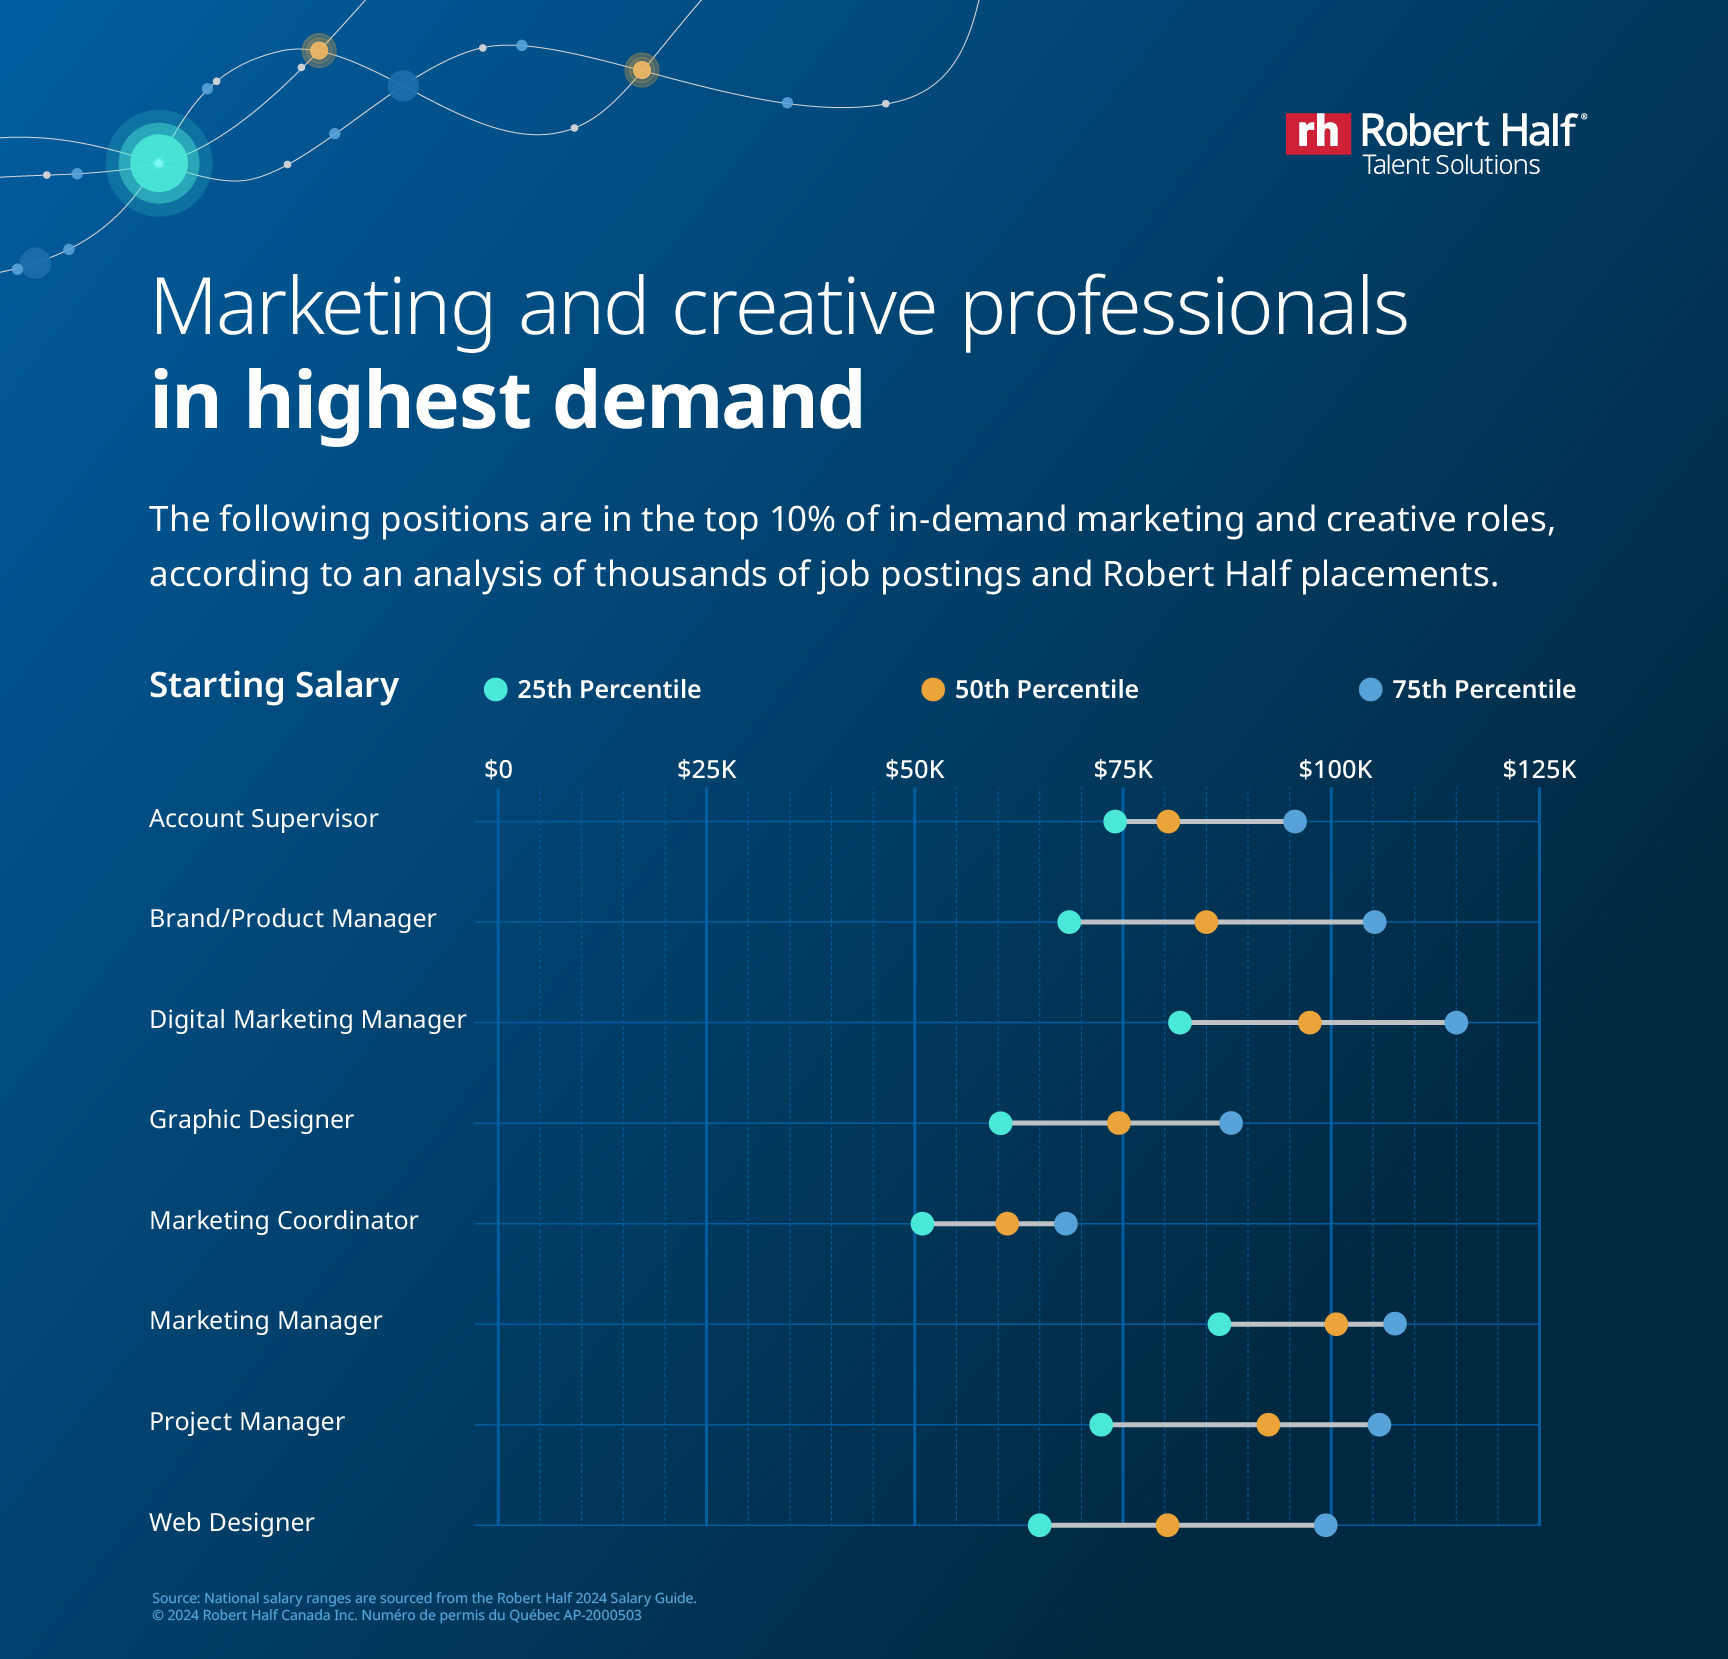 Infographic of marketing and creative roles in highest demand, with starting salary ranges.